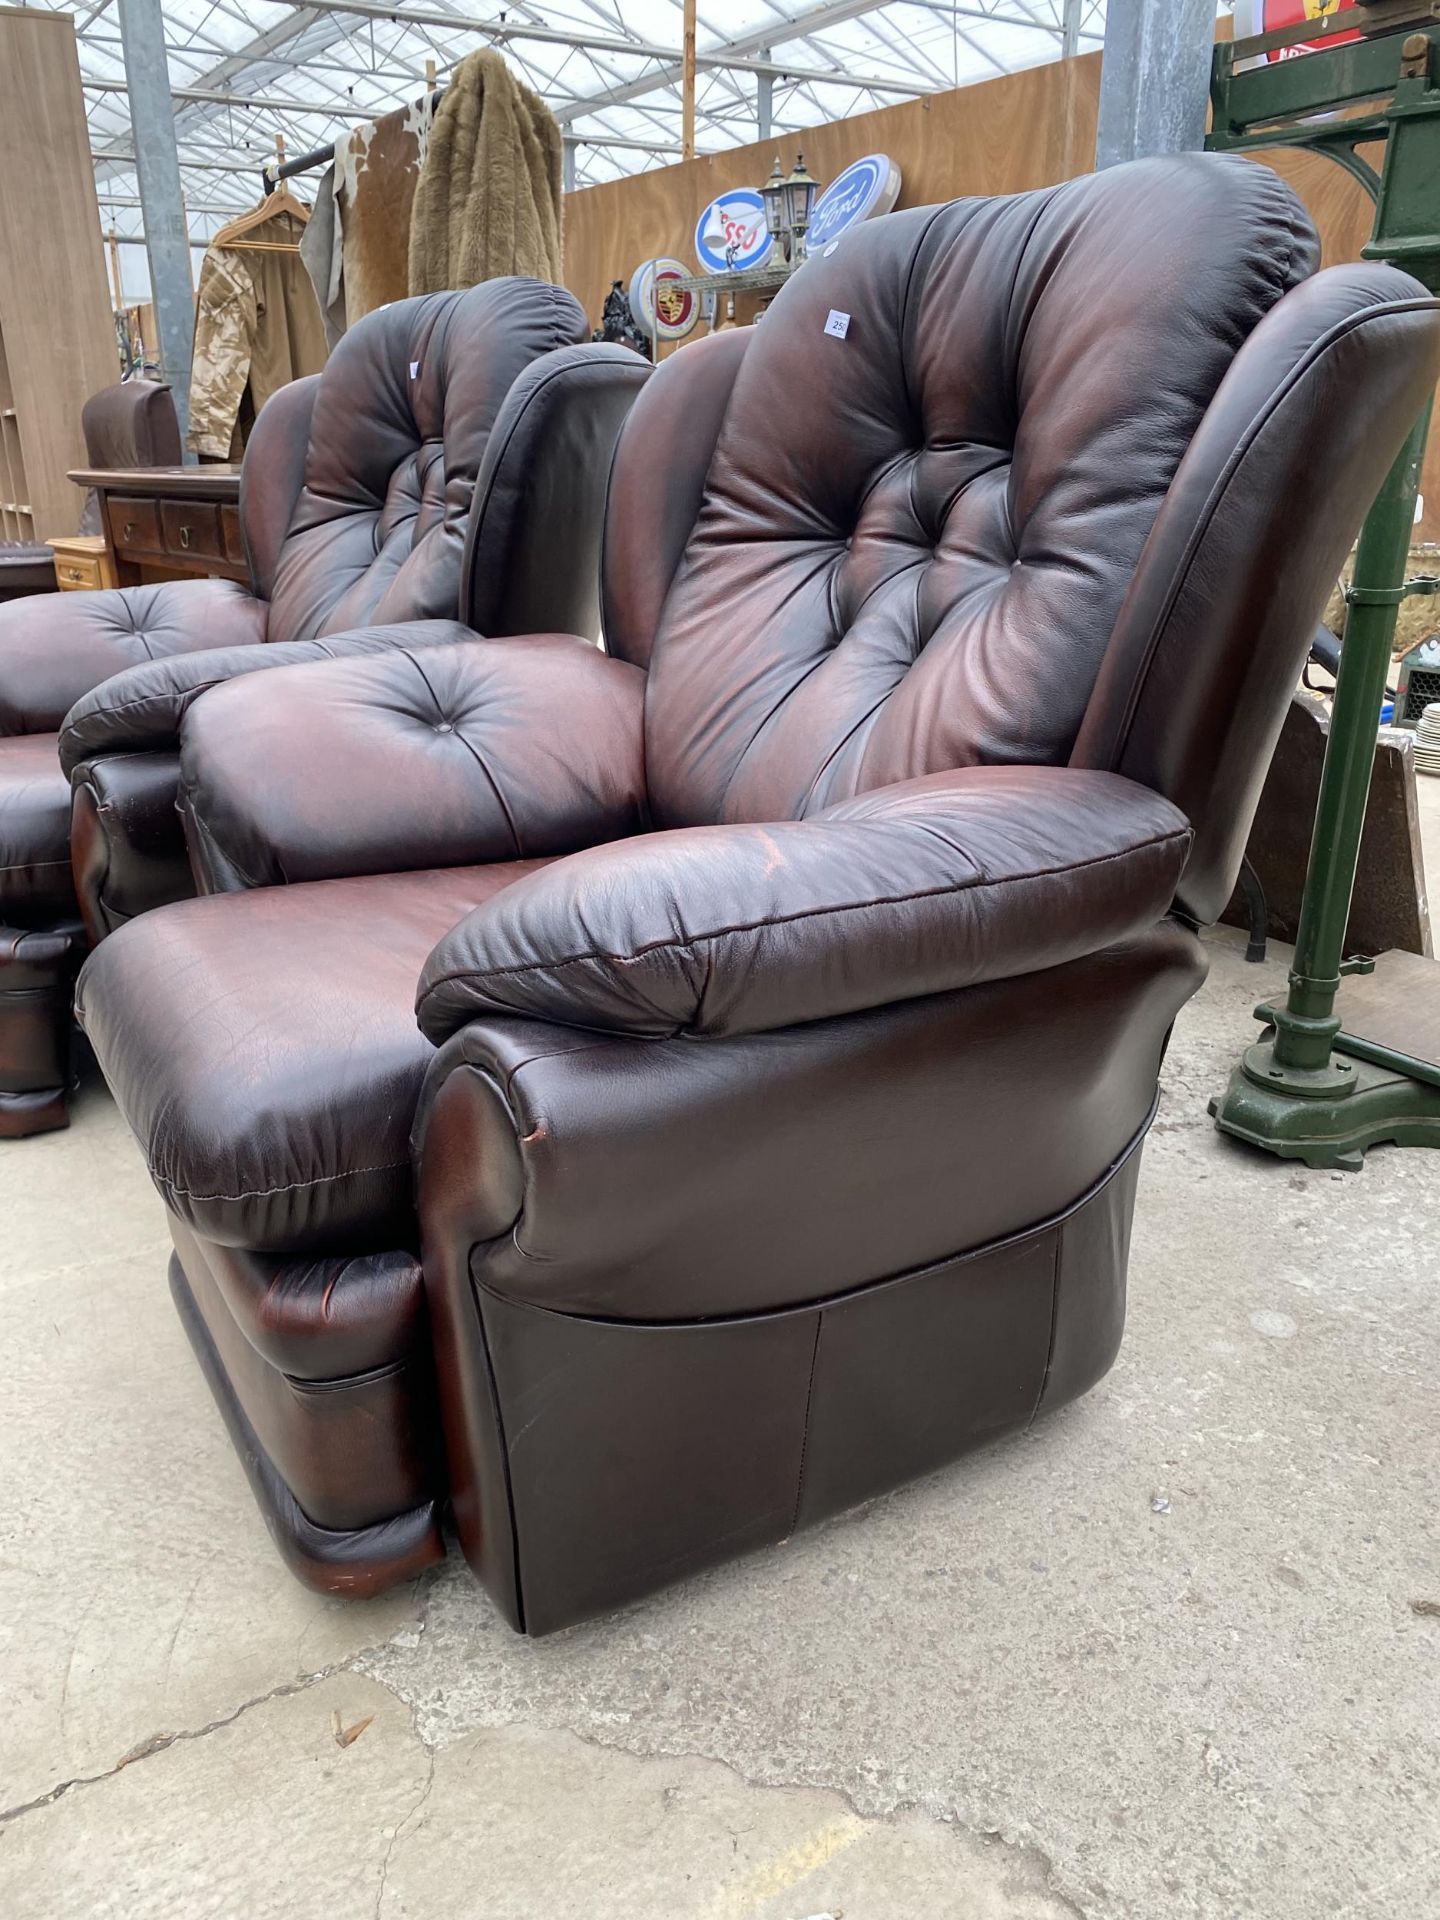 A MODERN SAXON LEATHER RECLINER CHAIR - Image 2 of 5